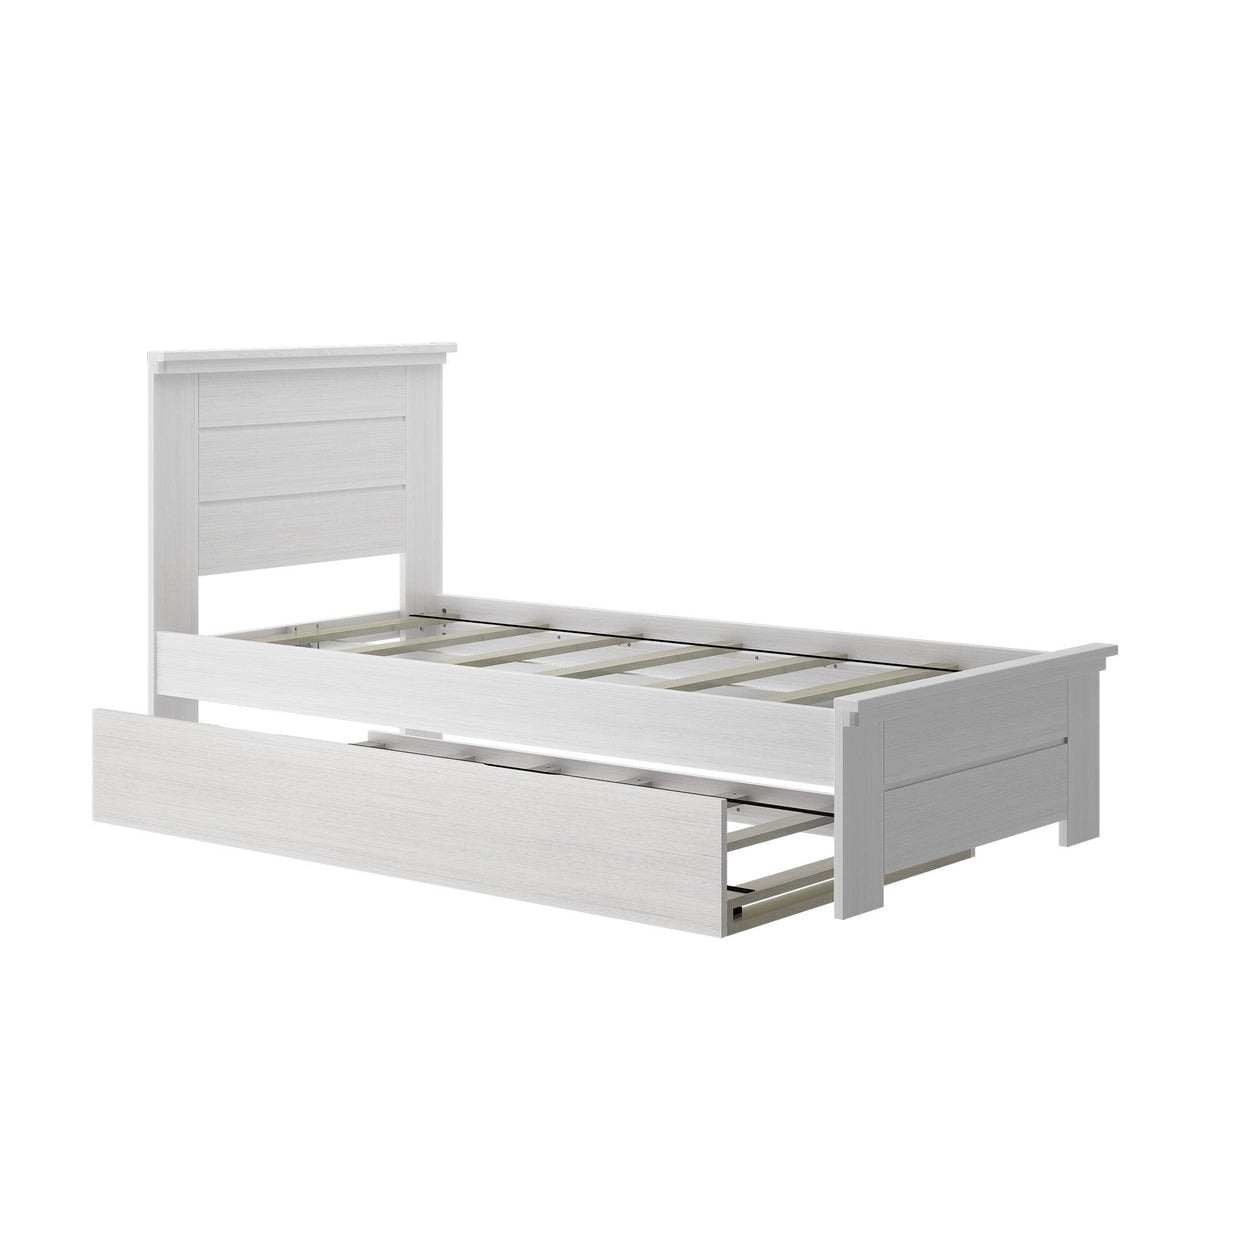 196220-182 : Kids Beds Farmhouse Twin Bed with Panel Headboard with Trundle, White Wash